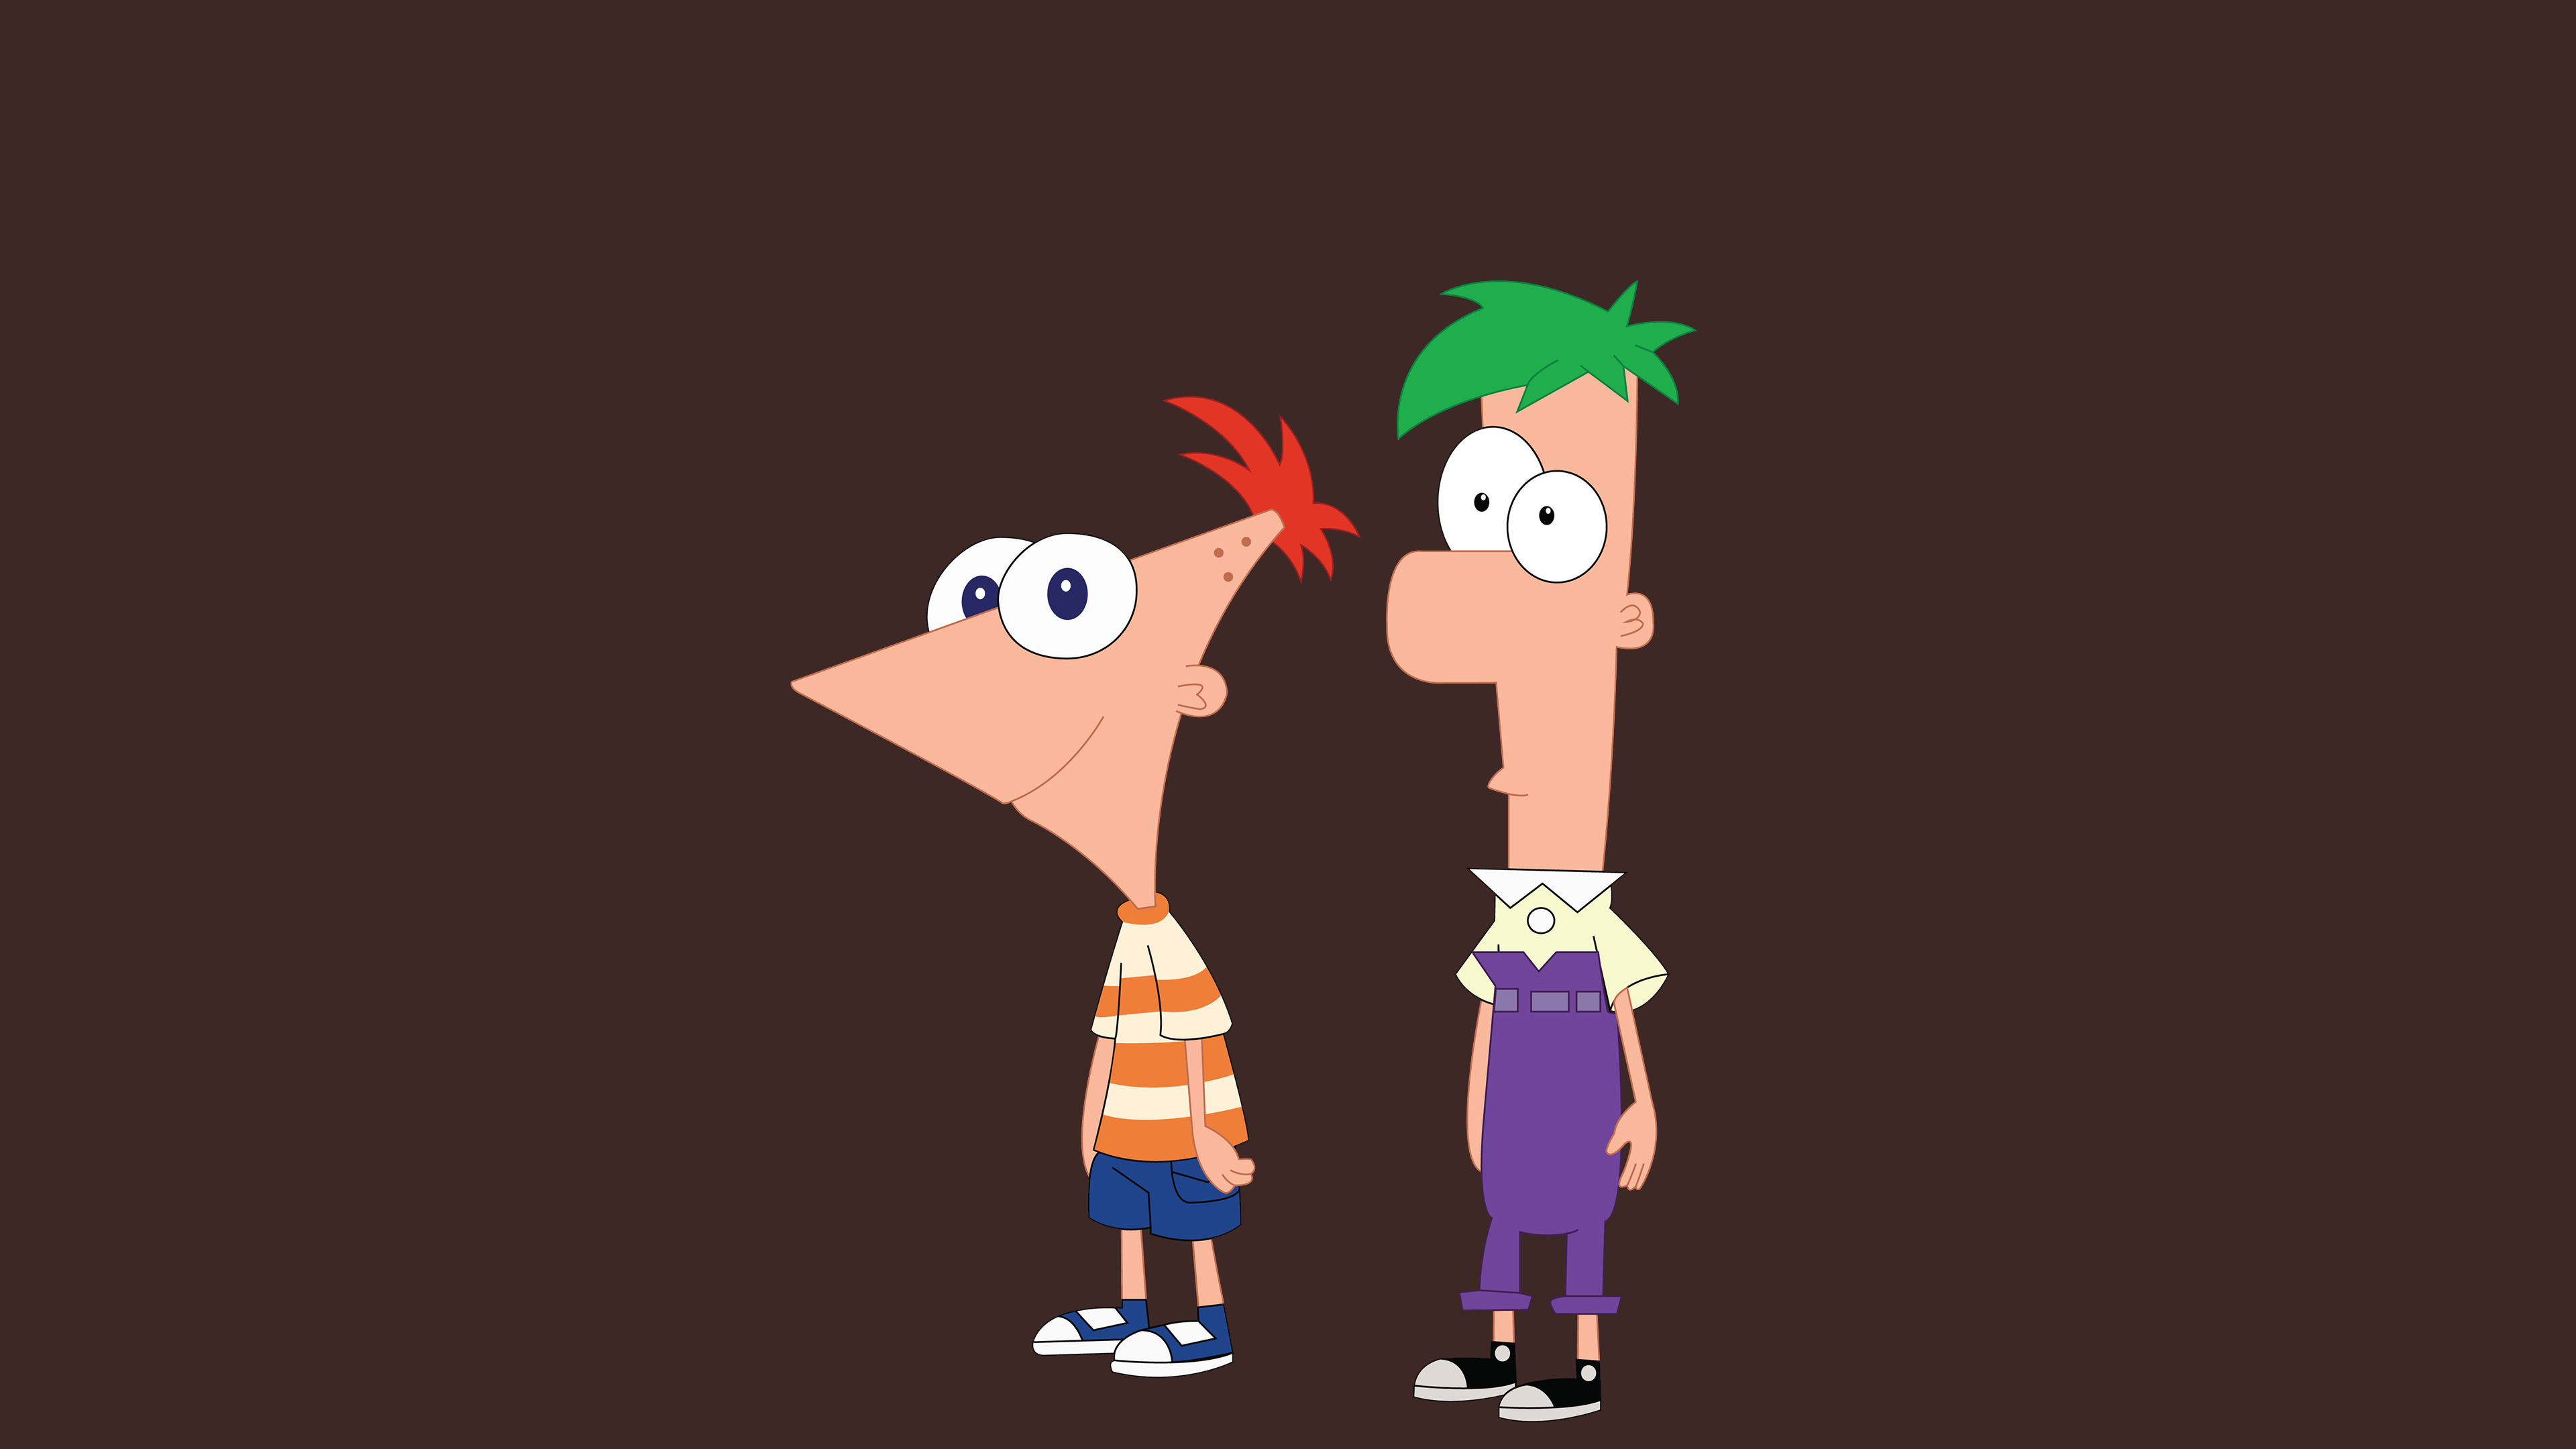 phineas and ferb wallpapers wallpaper cave on phineas and ferb wallpapers